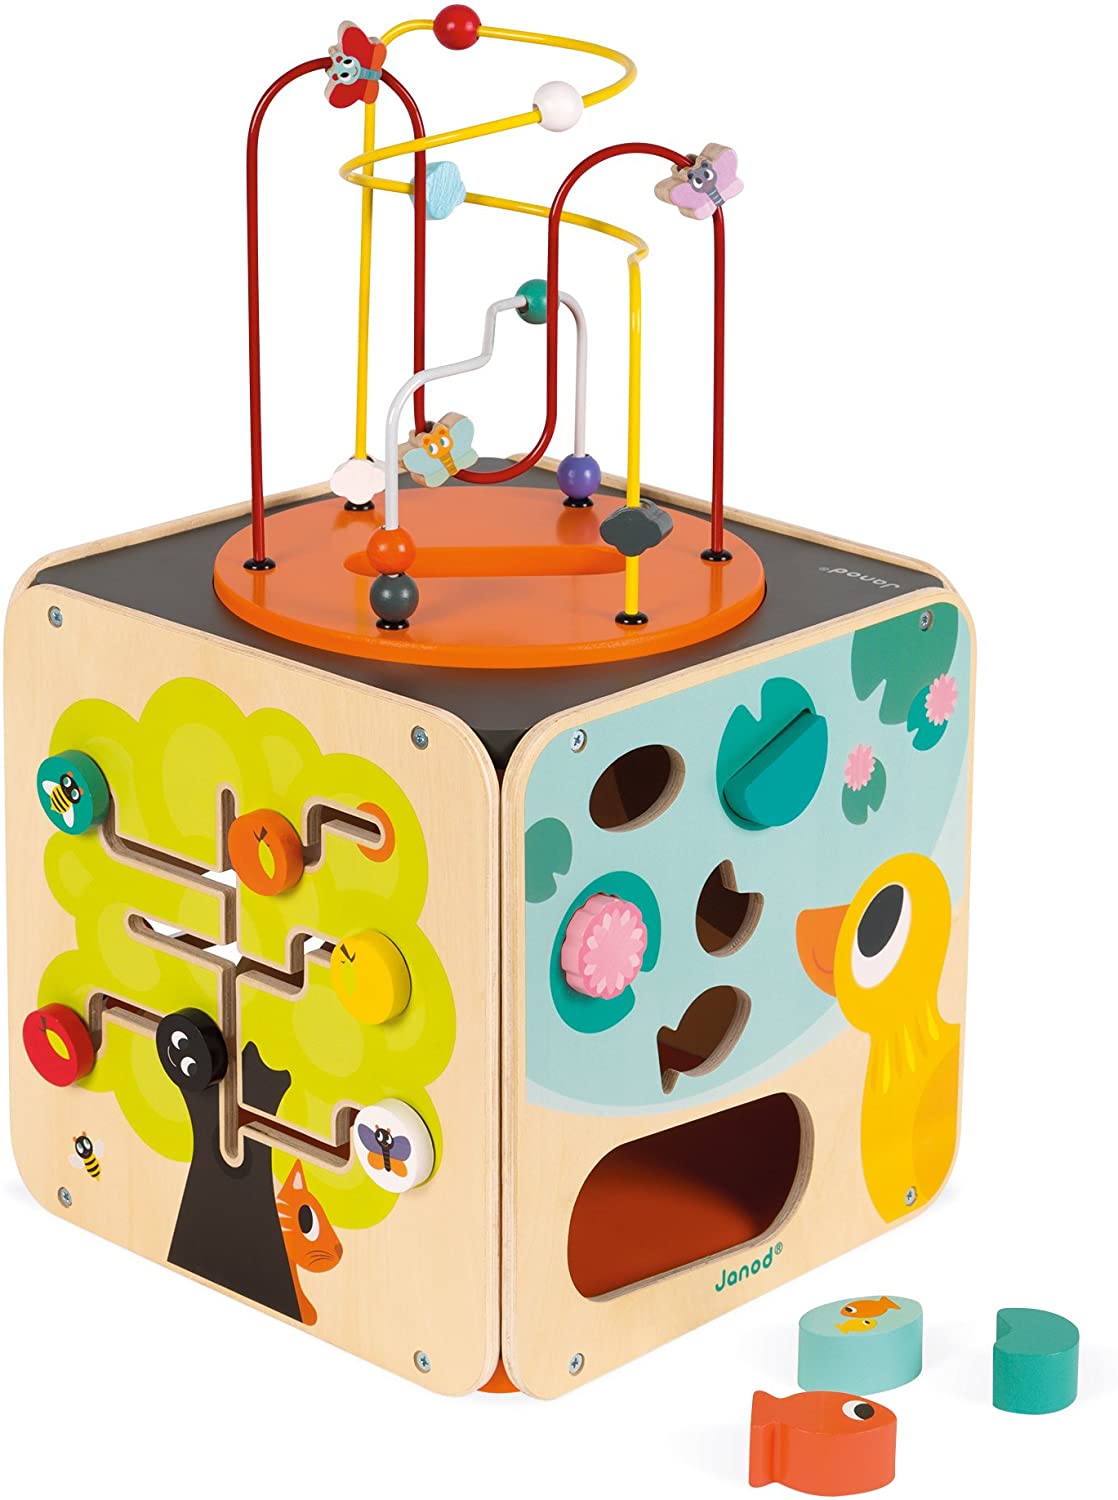 Janod J08256 Activity and Motor Cube 8 Functions 8 Multi-Coloured Large